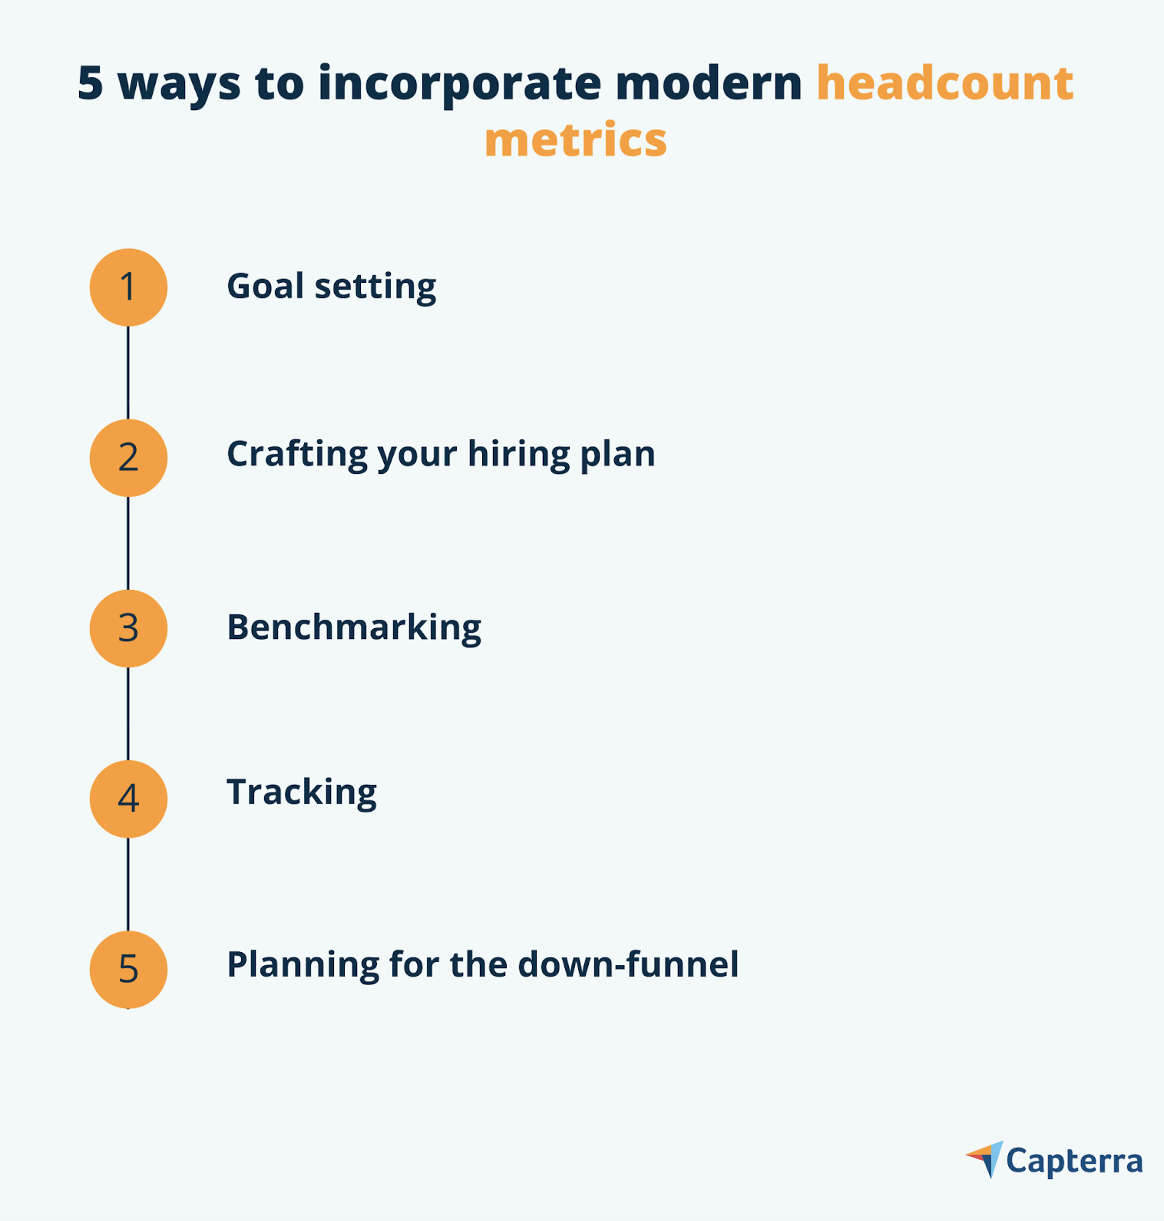 Image for the blog article "Modern Recruiting Metrics: A Fresh Approach for Setting Headcount Goals"